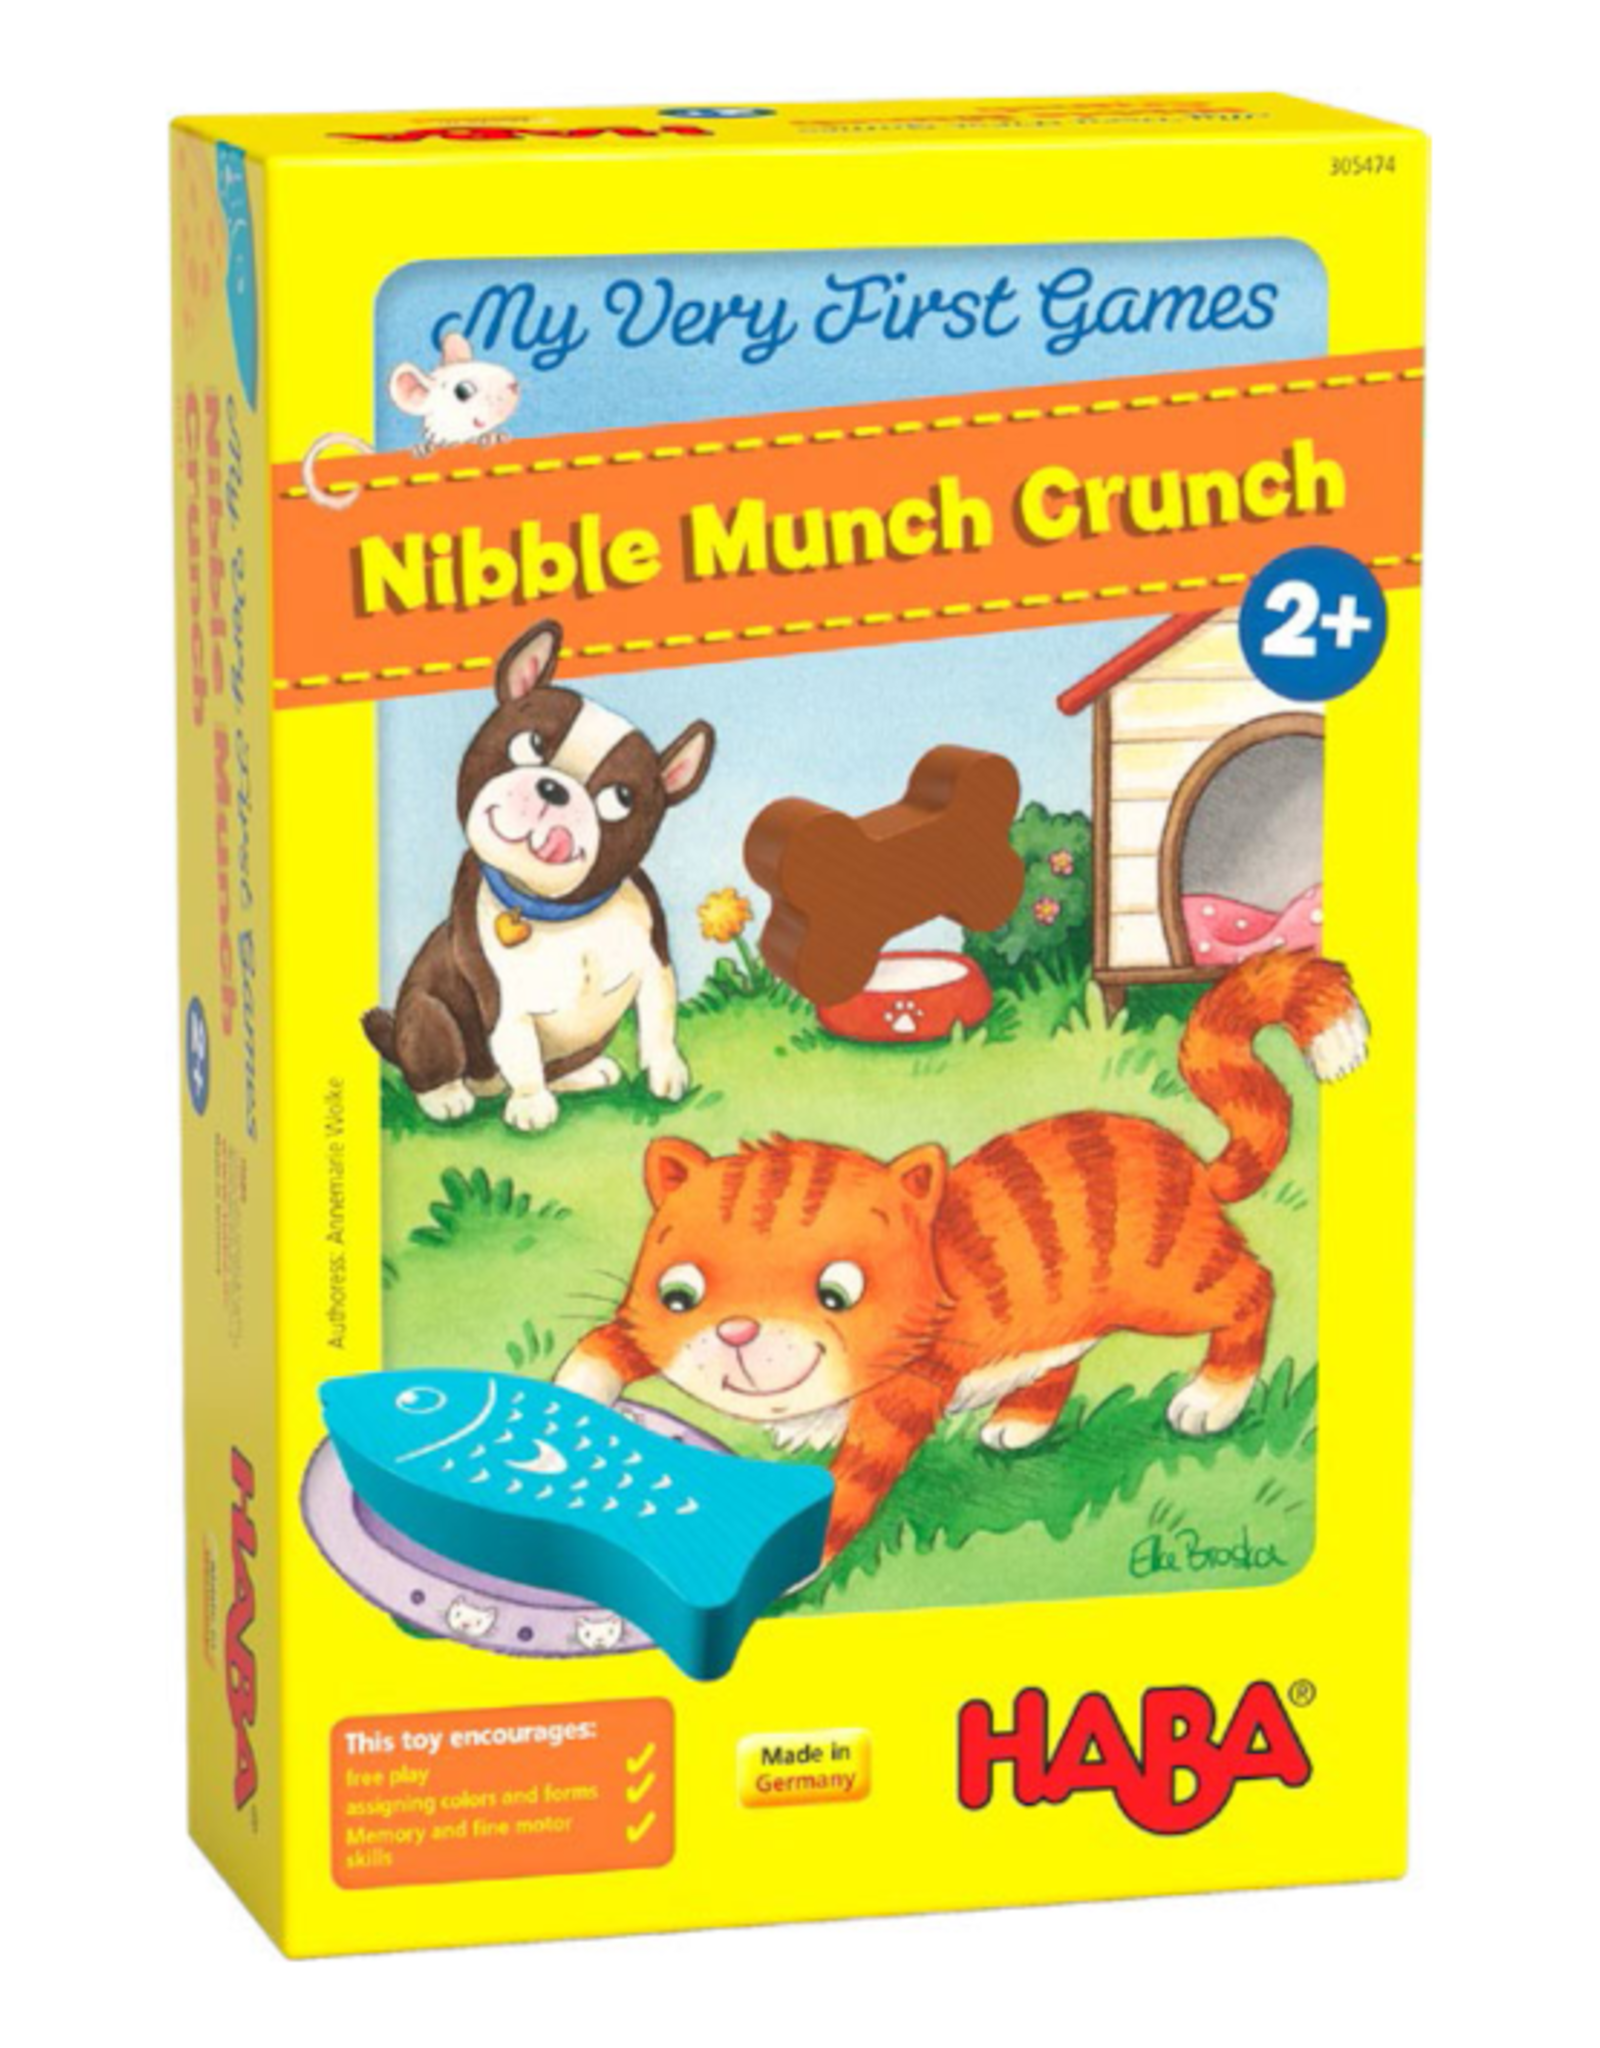 Haba Haba - My Very First Games - Nibble Munch Crunch